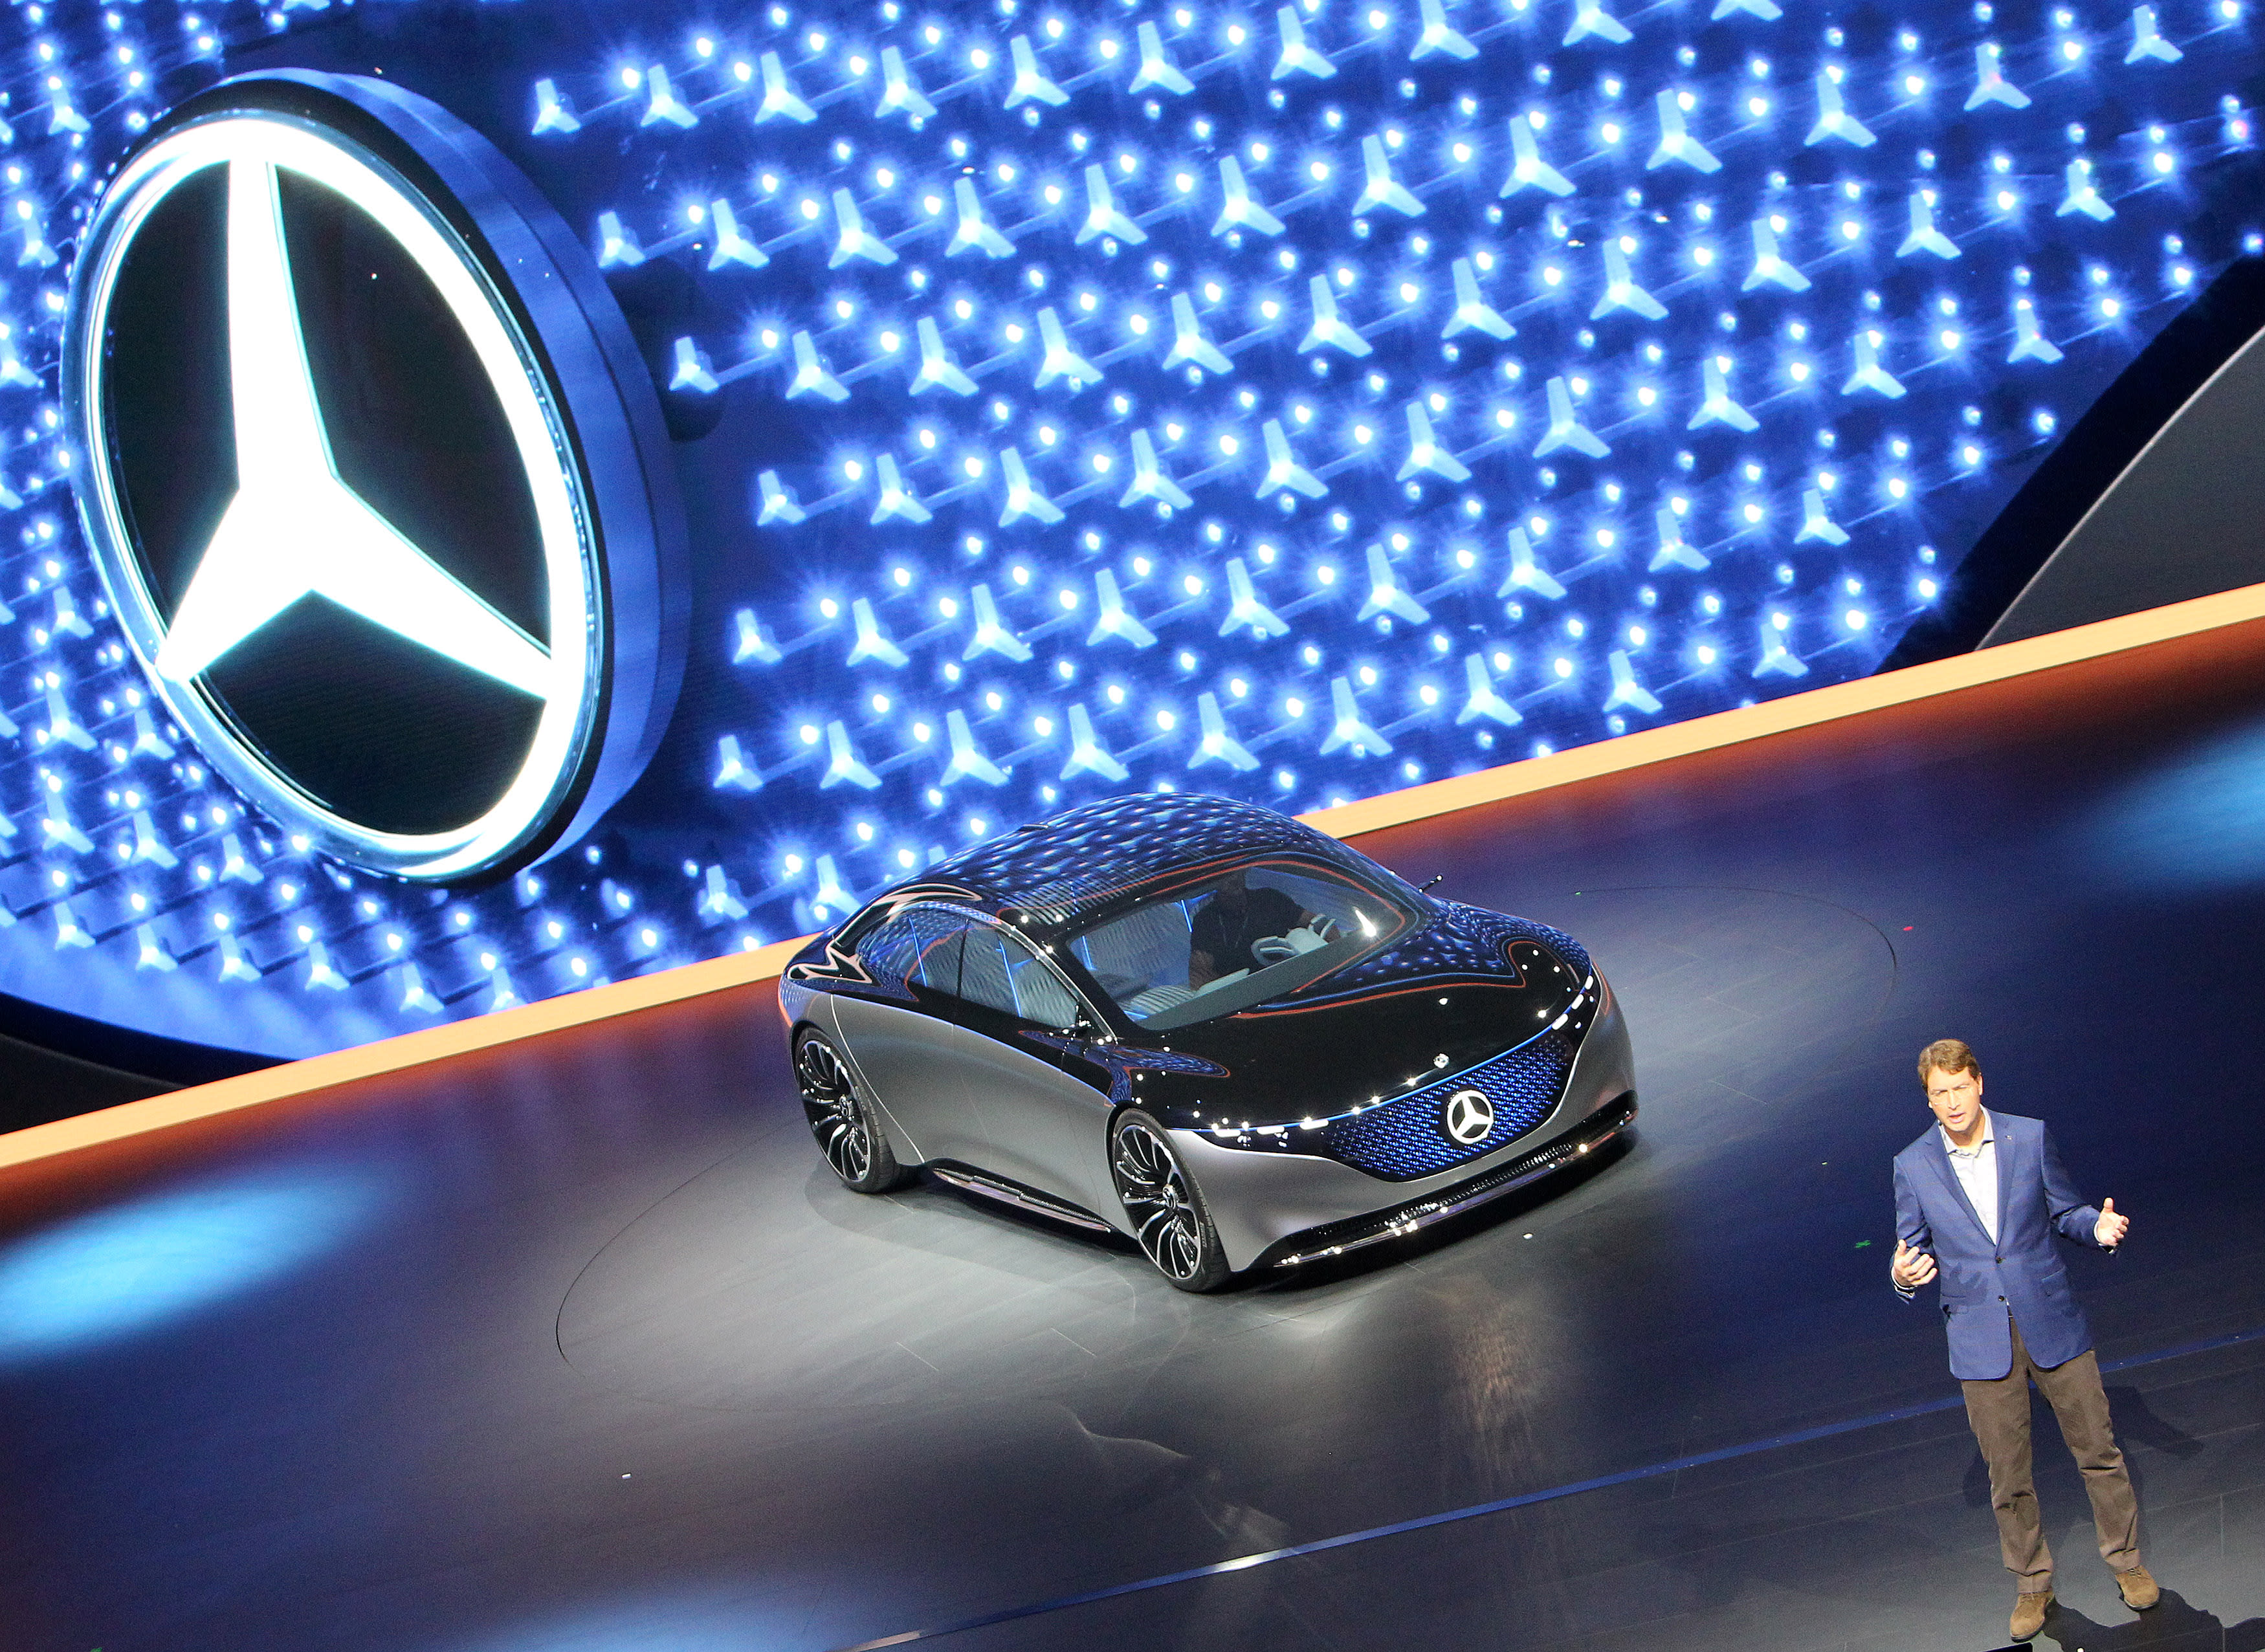 Mercedes-Benz ups competition against Tesla with all-electric Vision EQS